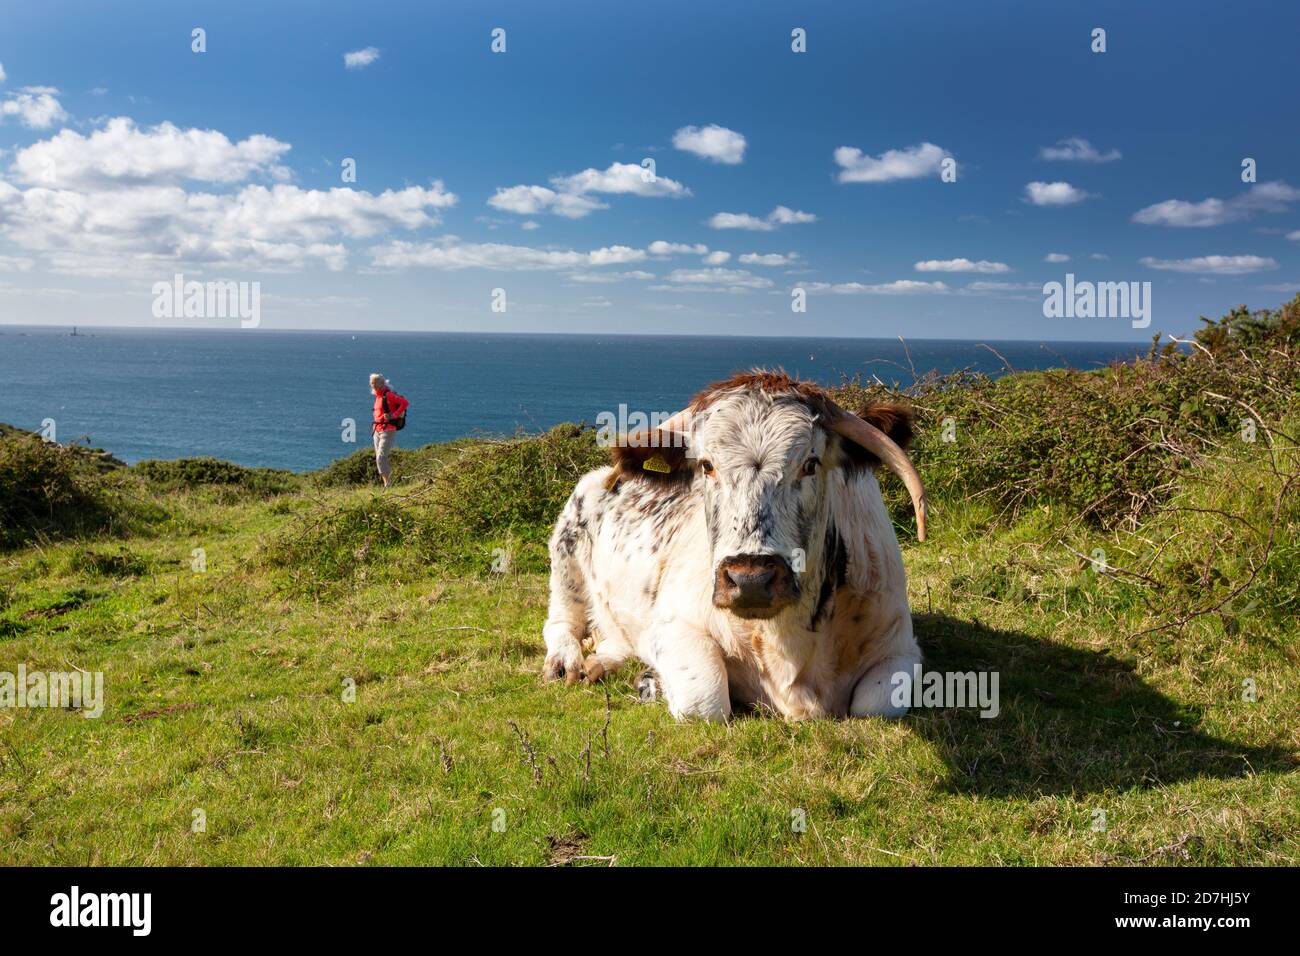 An English Long horn cow used for conservation grazing on the Cornish coast near Sennen, UK. Stock Photo